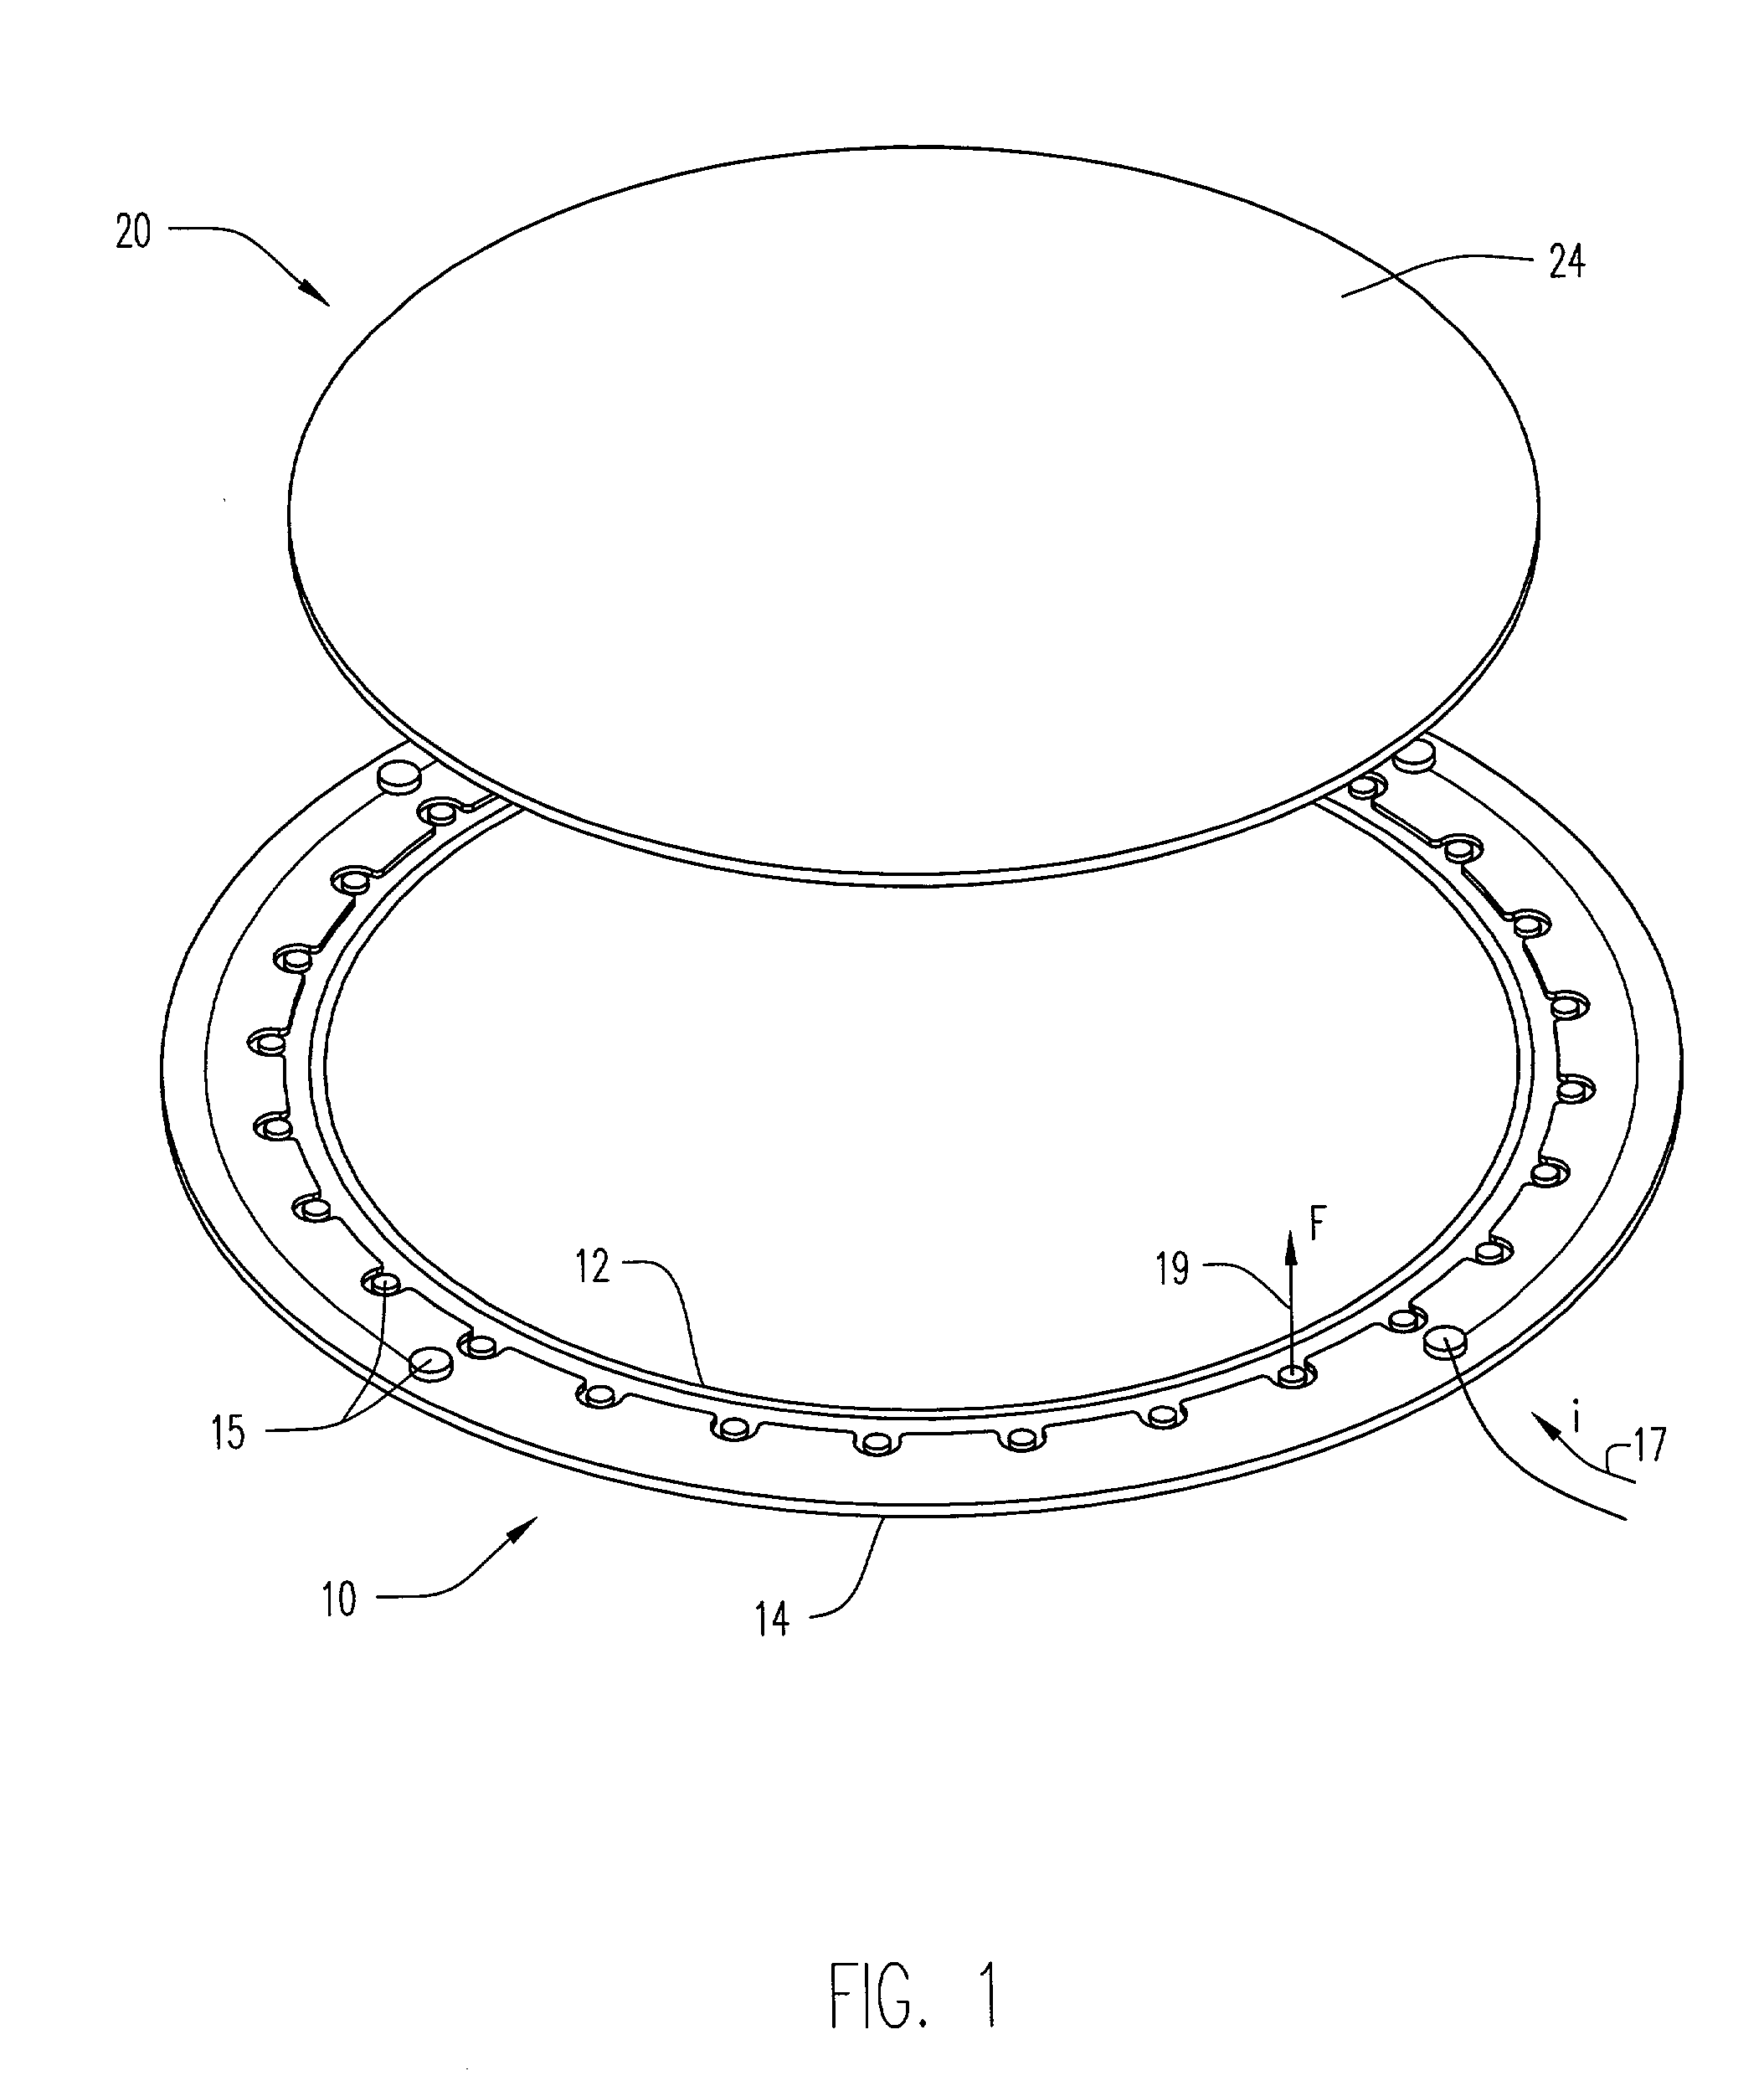 Method of and apparatus for fluid sealing, while electrically contacting, wet-processed workpieces, as in the electrodeposition of semi-conductor wafers and the like and for other wet processing techniques and workpieces